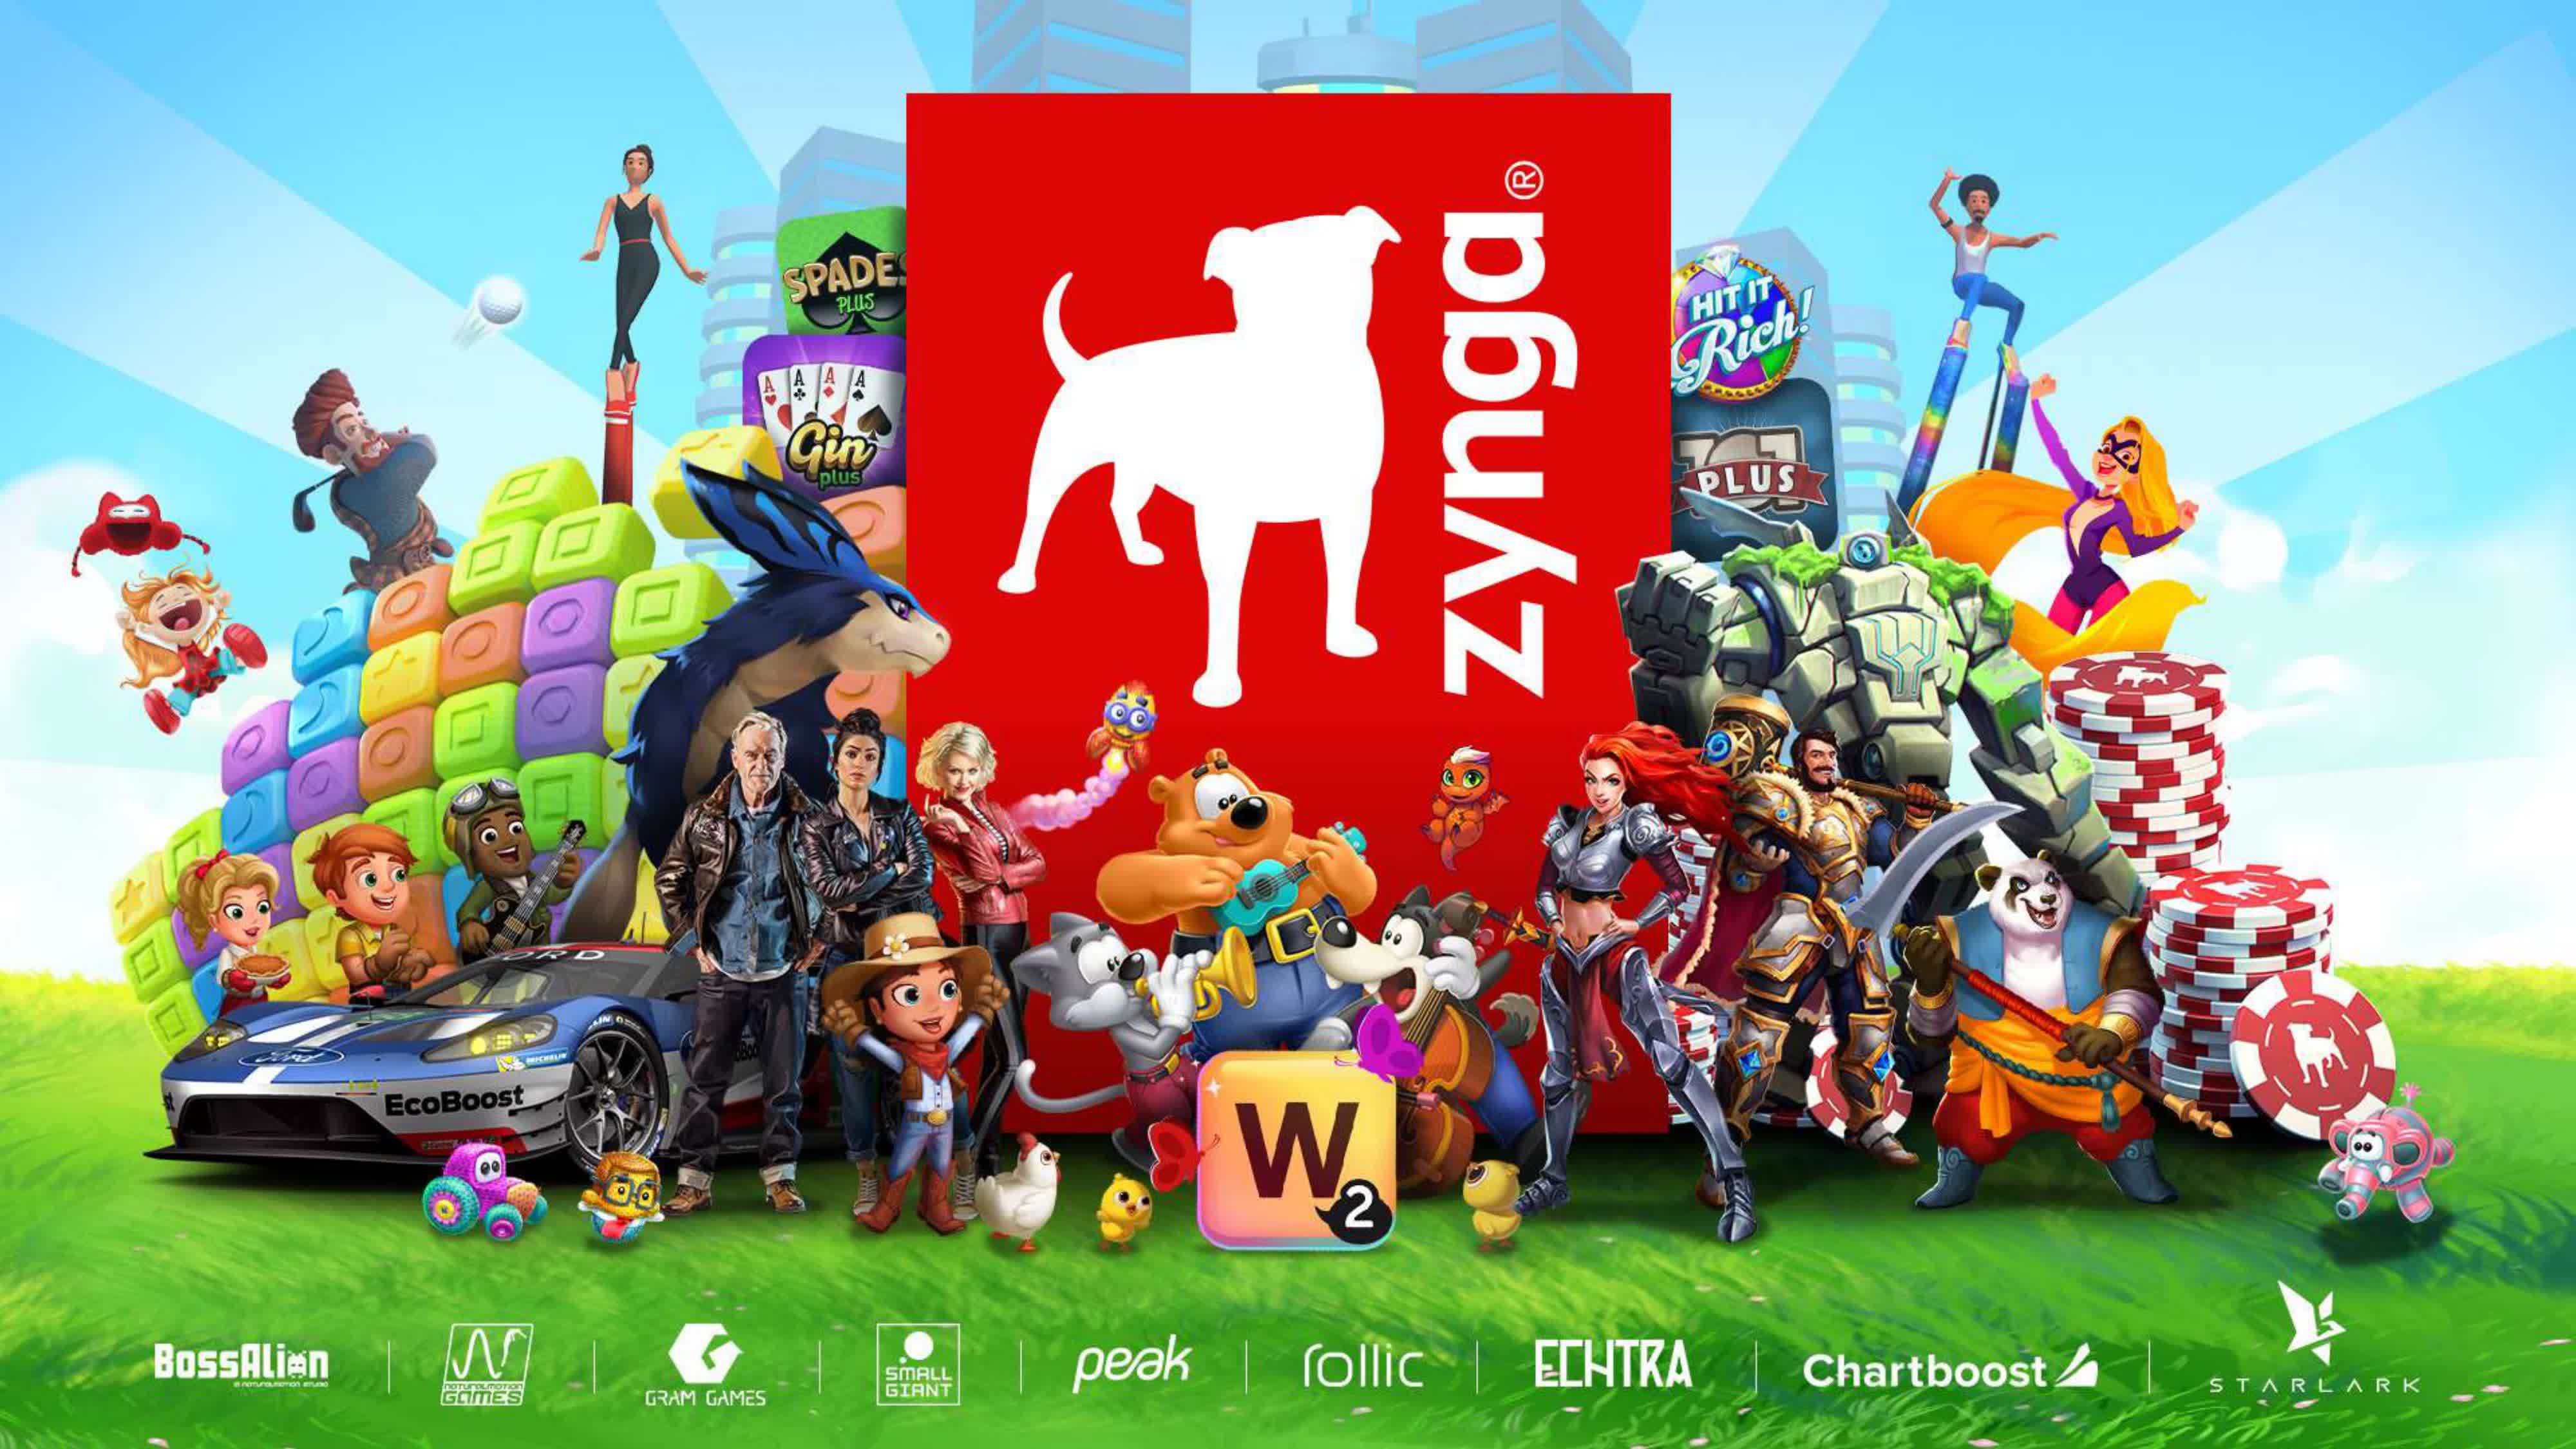 TakeTwo Interactive to buy game developer Zynga for 12.7